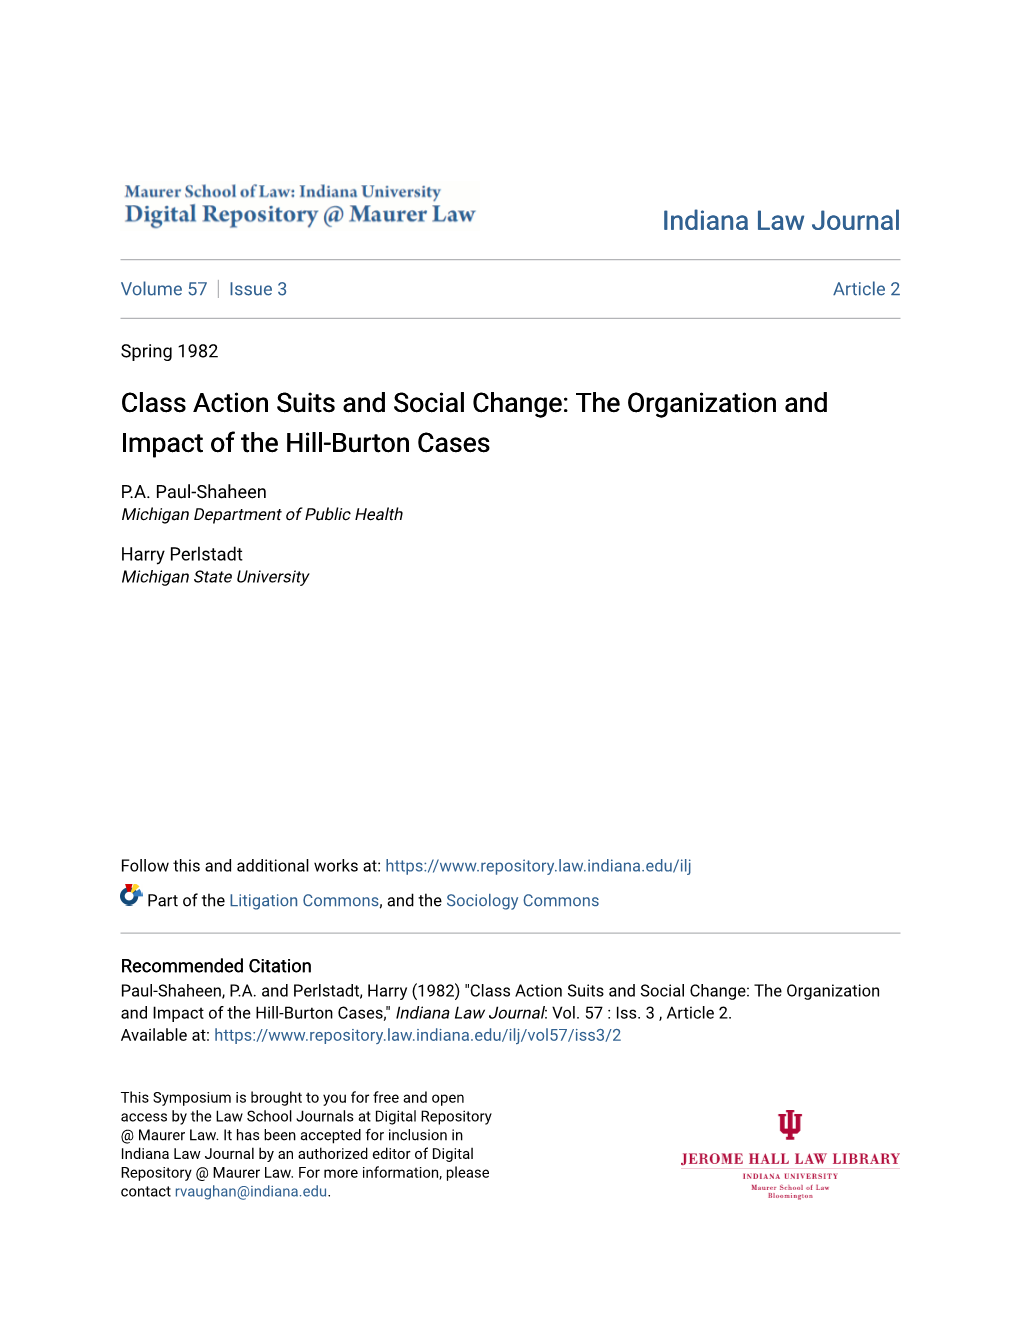 Class Action Suits and Social Change: the Organization and Impact of the Hill-Burton Cases